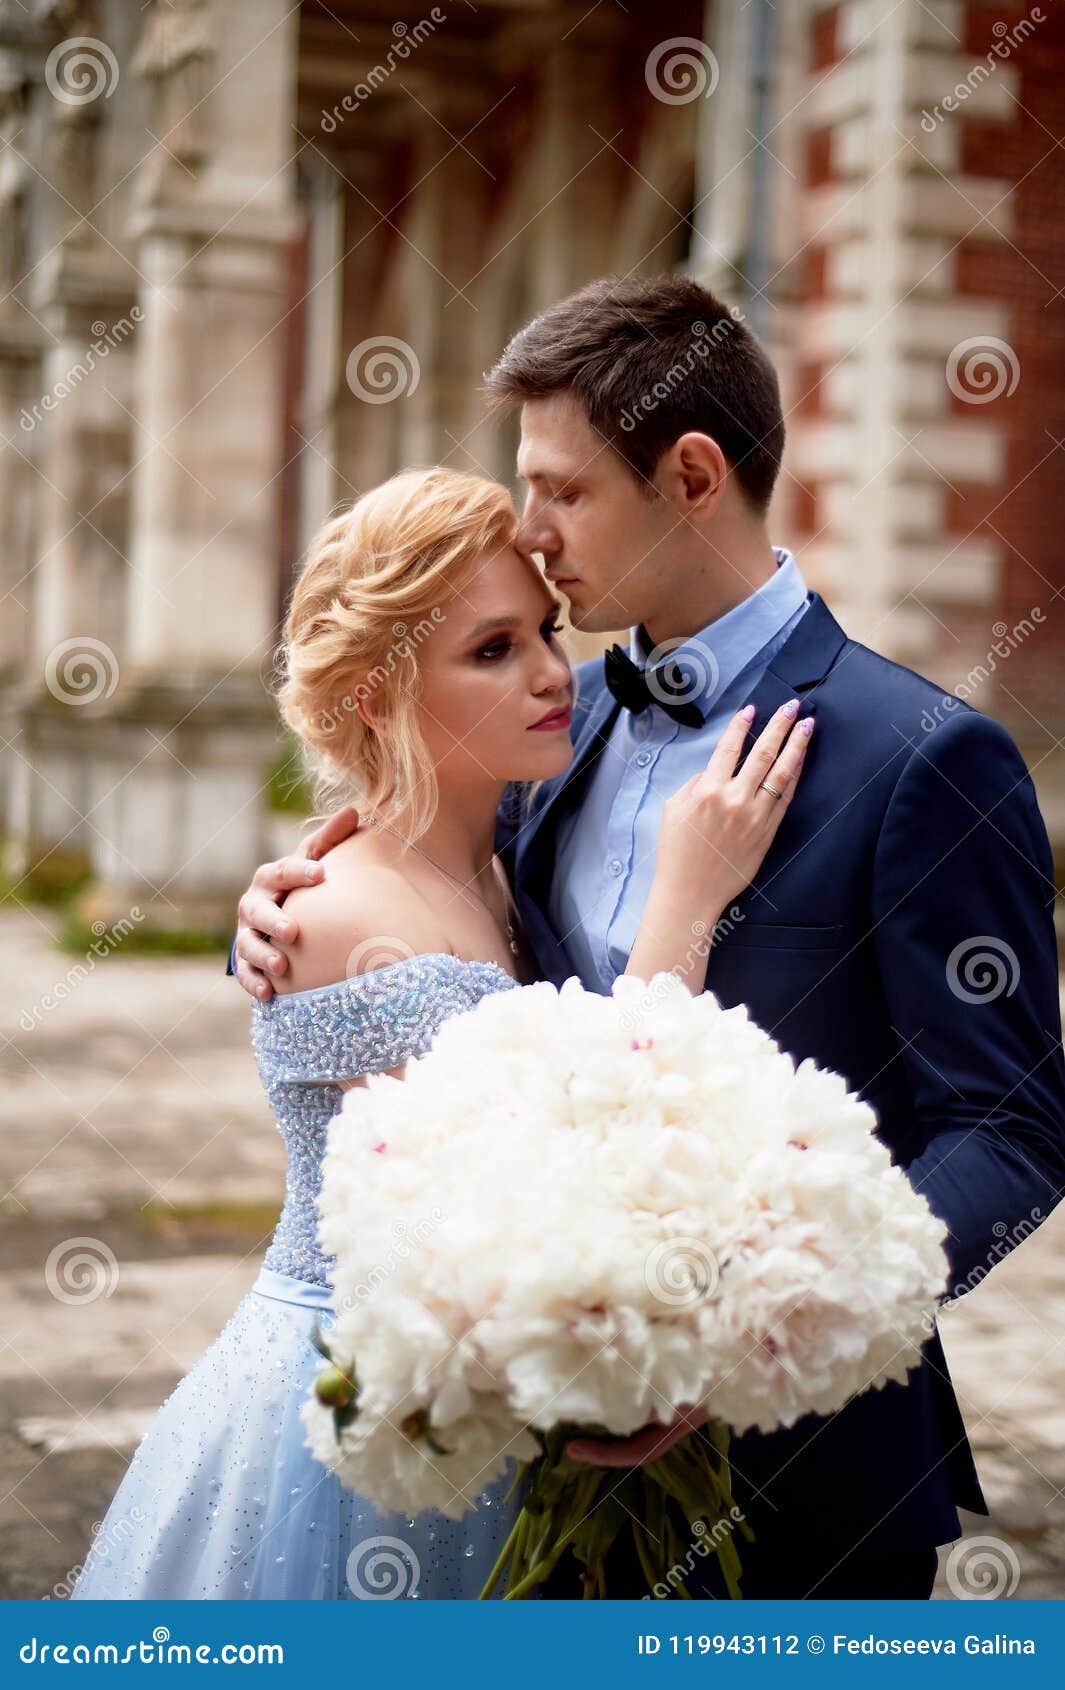 Bride And Groom On The Background Of An Old Estate Classical